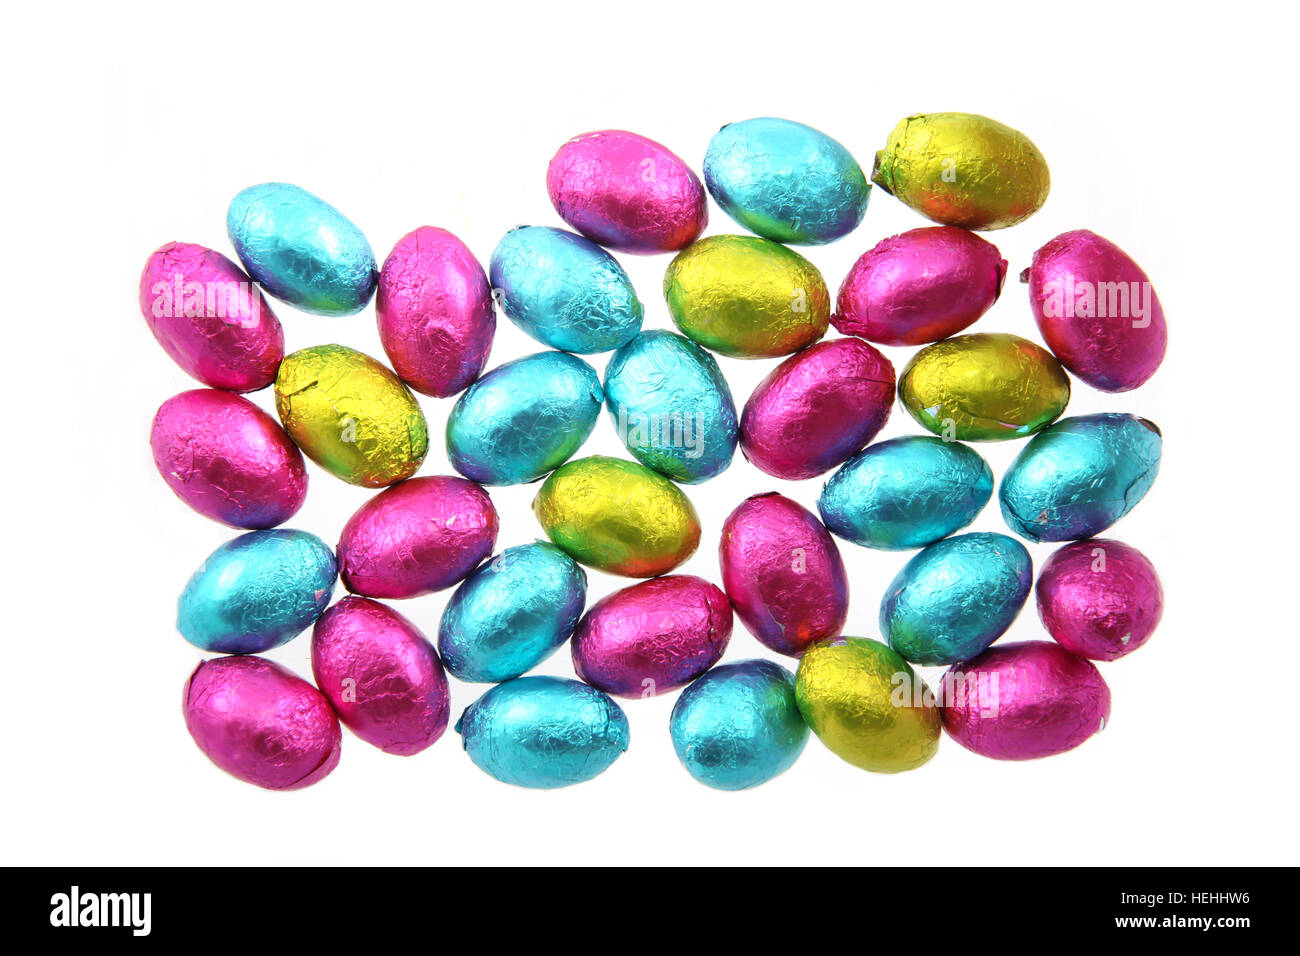 Pile of foil wrapped chocolate easter eggs in pink, blue & lime green with a white background. Stock Photo